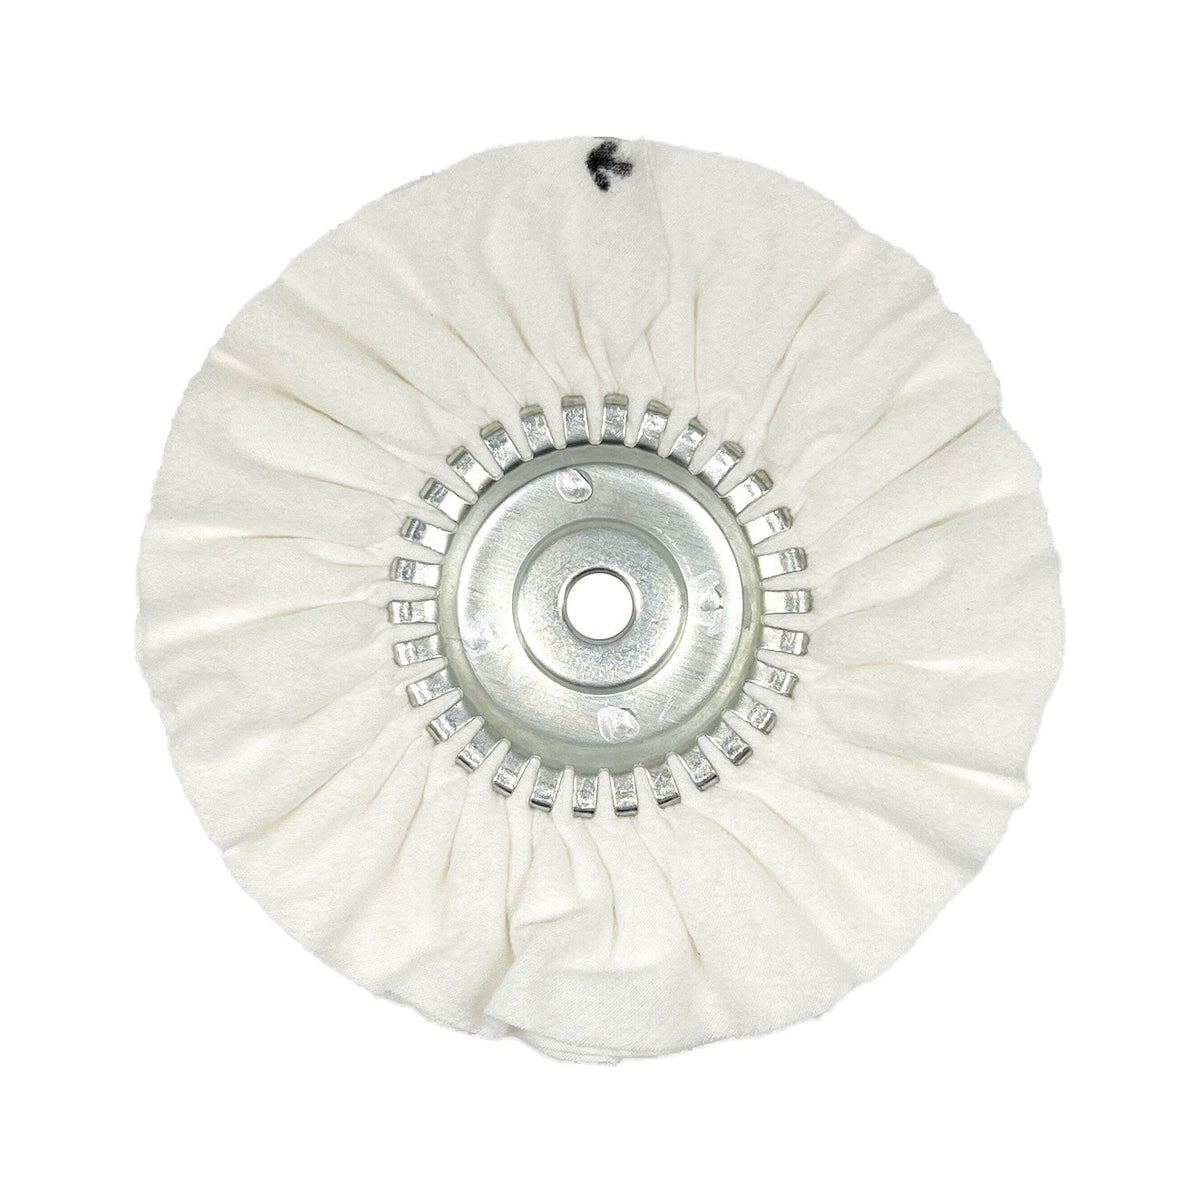 Renegade Products USA white airway buffing wheel with center plate, engineered for exceptional polishing and buffing performance